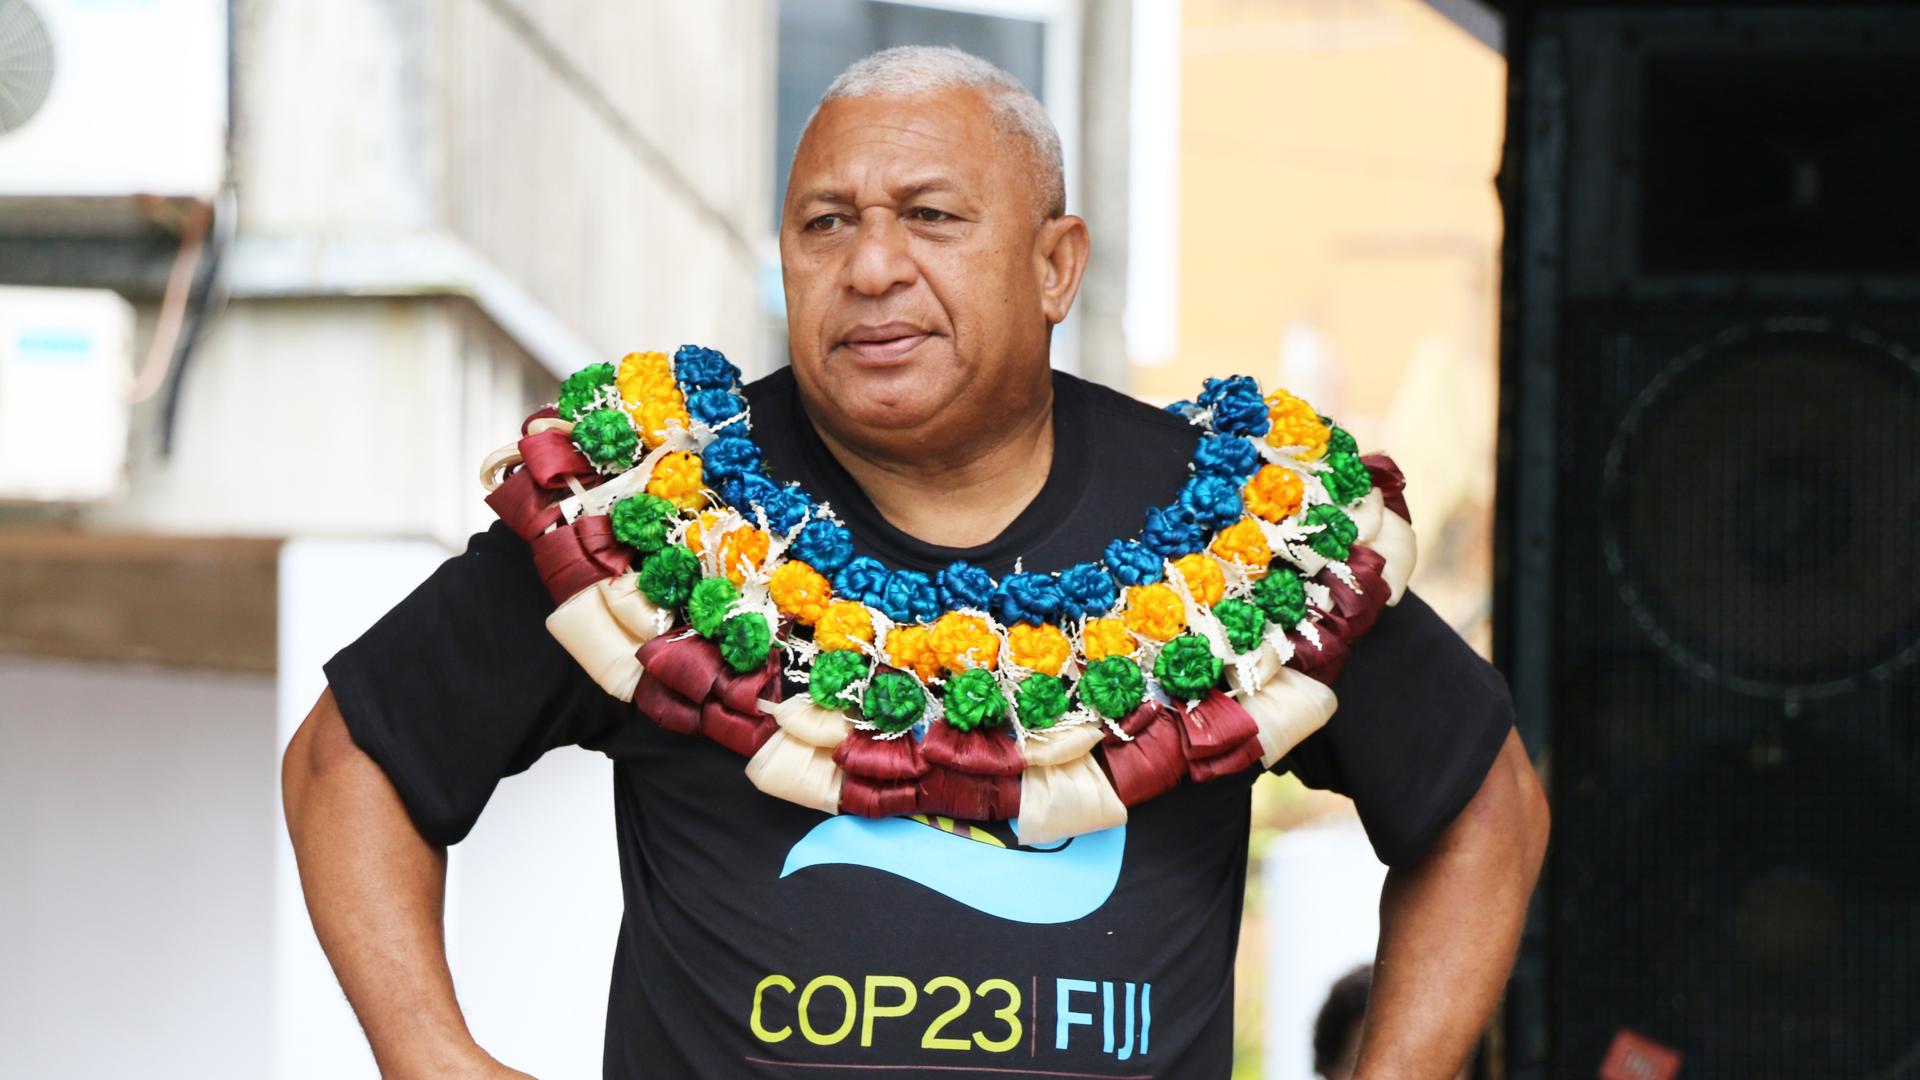 Fiji's Prime Minister Josaia Voreqe Bainimarama recently led a rally in support of this year's UN climate summit in Germany, at which Fiji will be presiding.